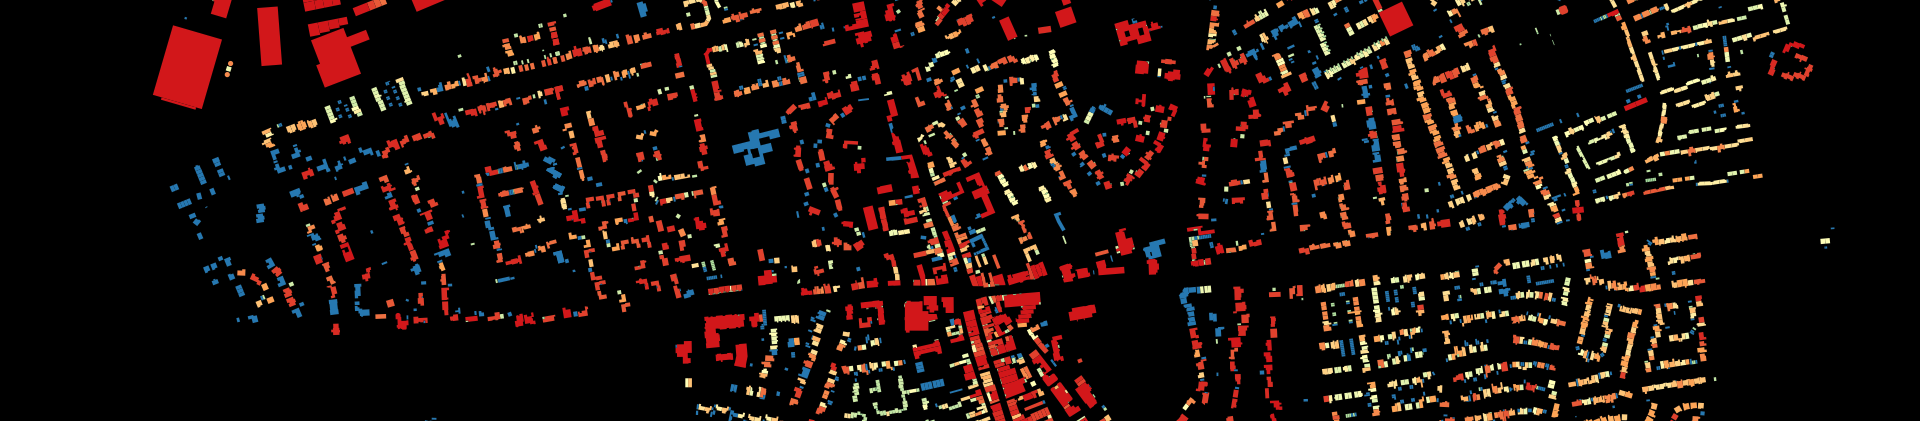 Articles 2006: Centrality measures in spatial networks of urban streets